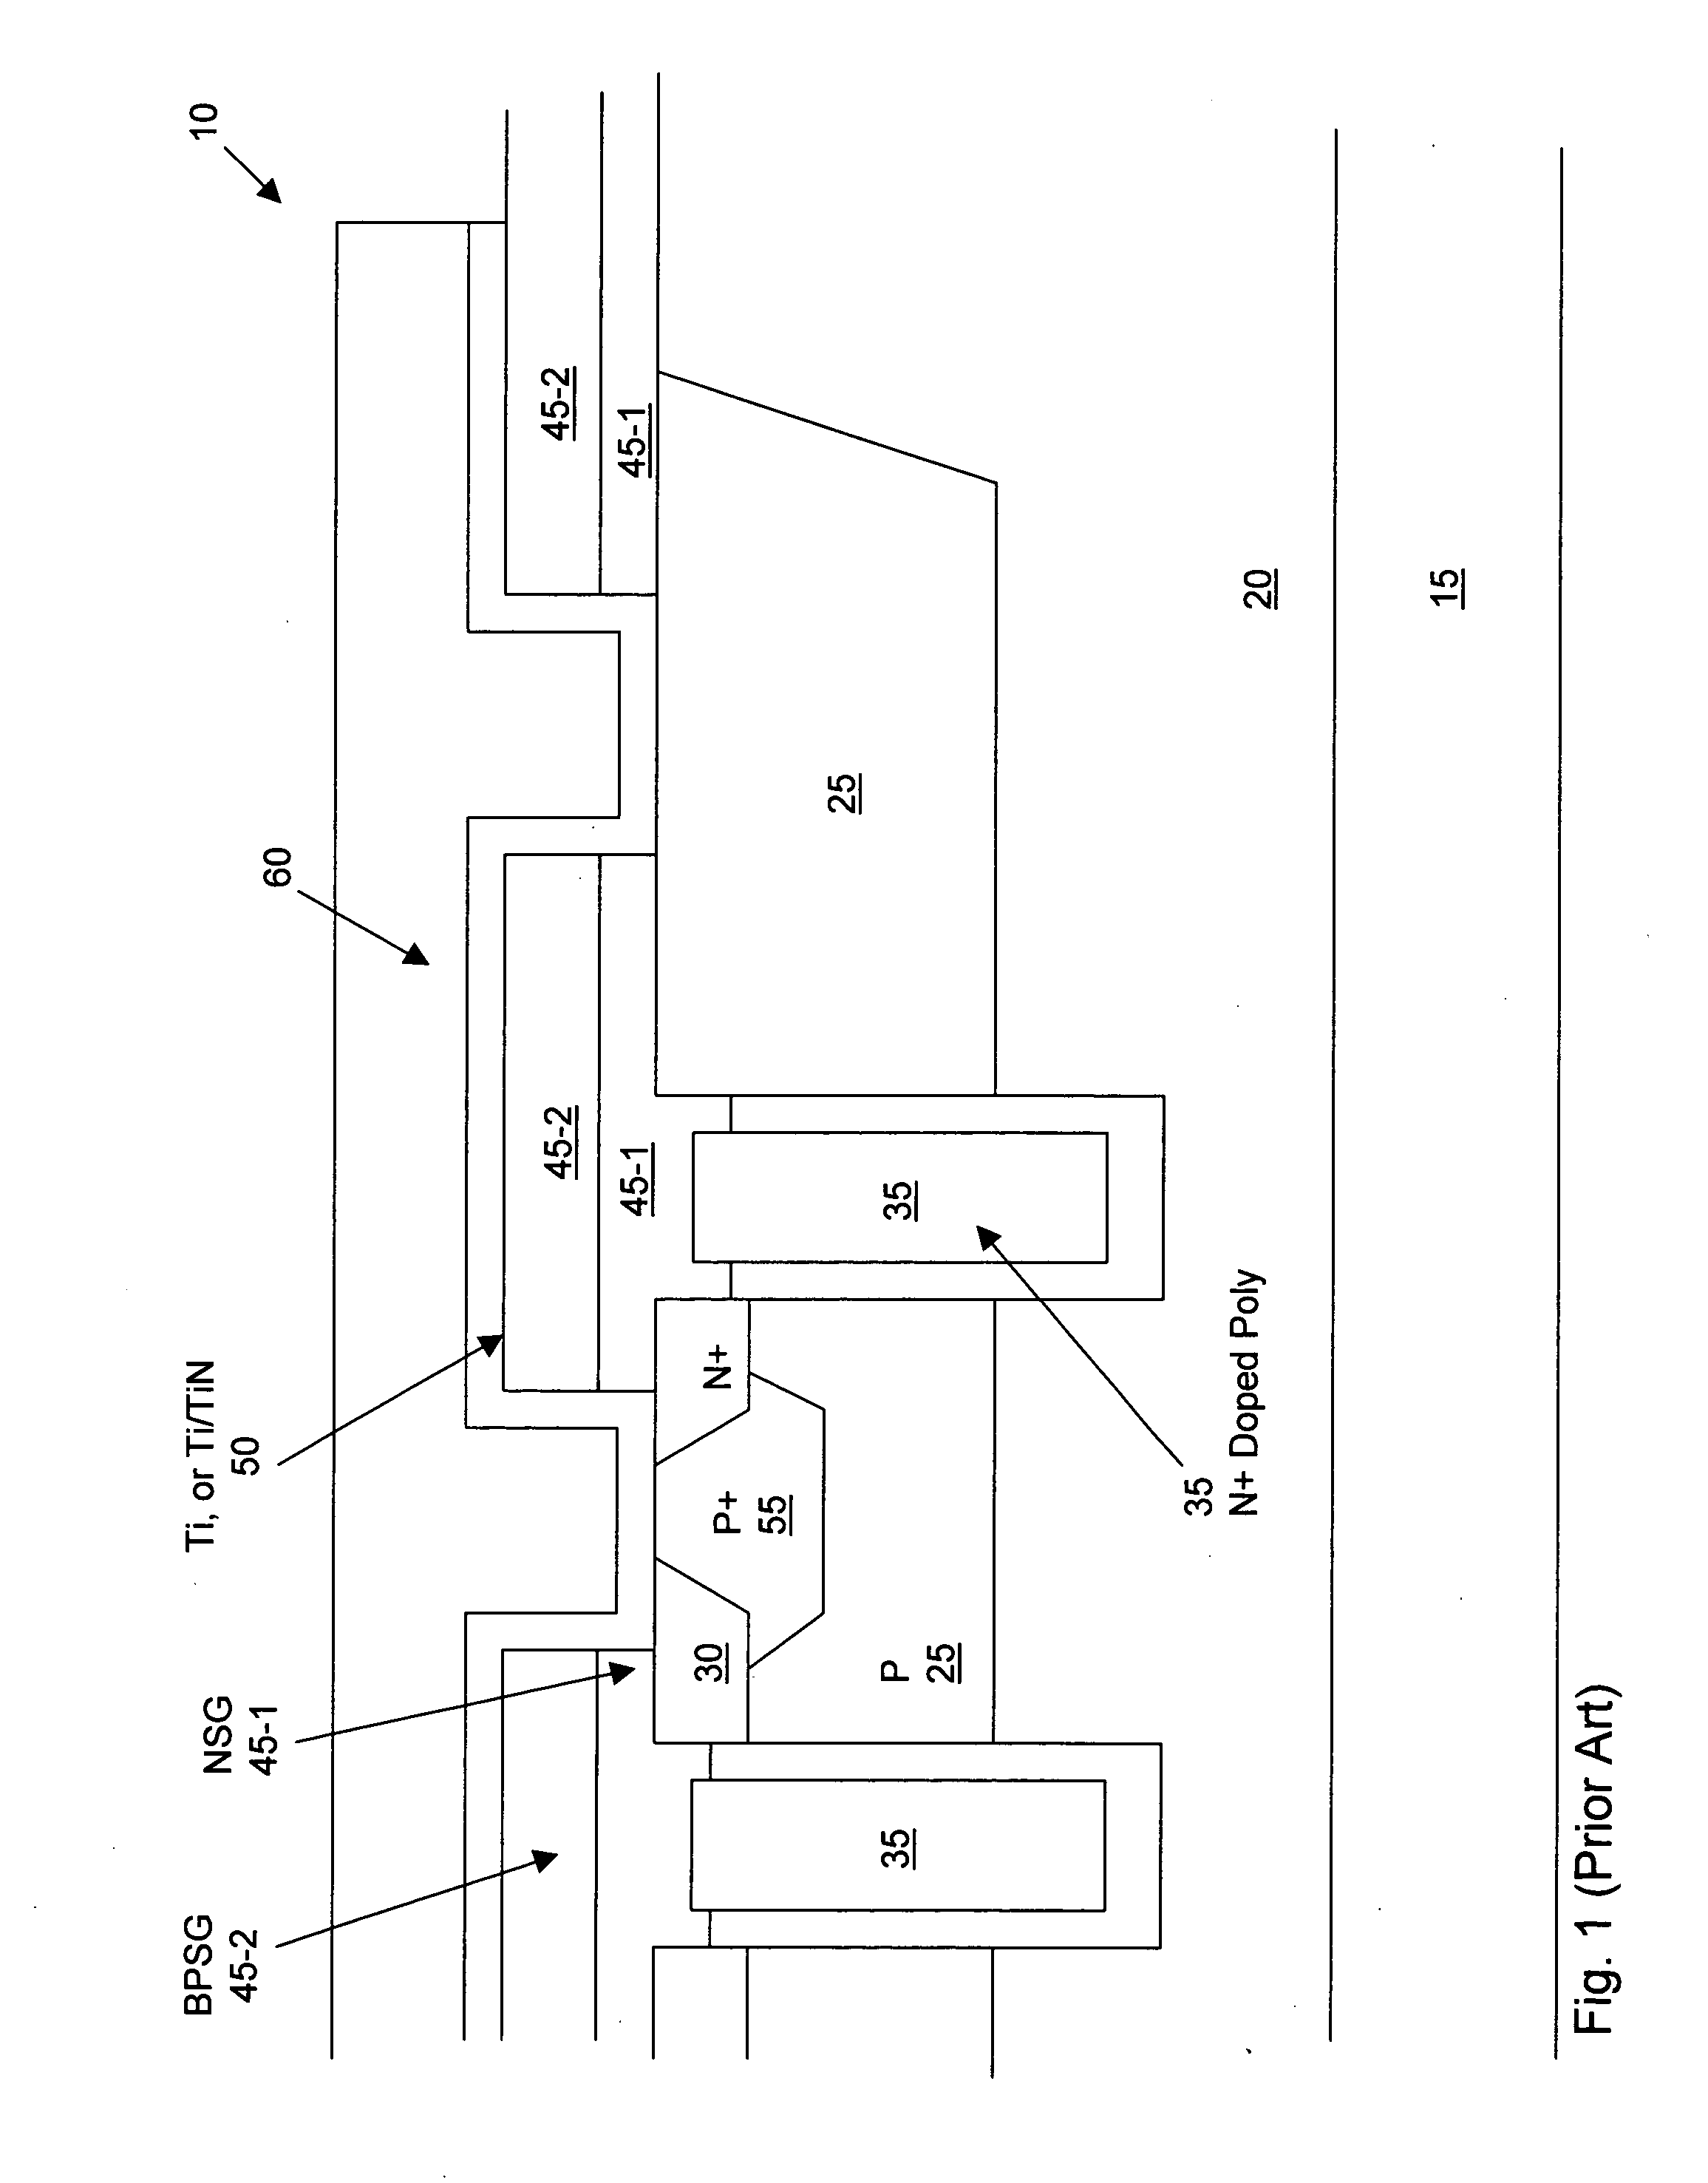 Structure for avalanche improvement of ultra high density trench MOSFET